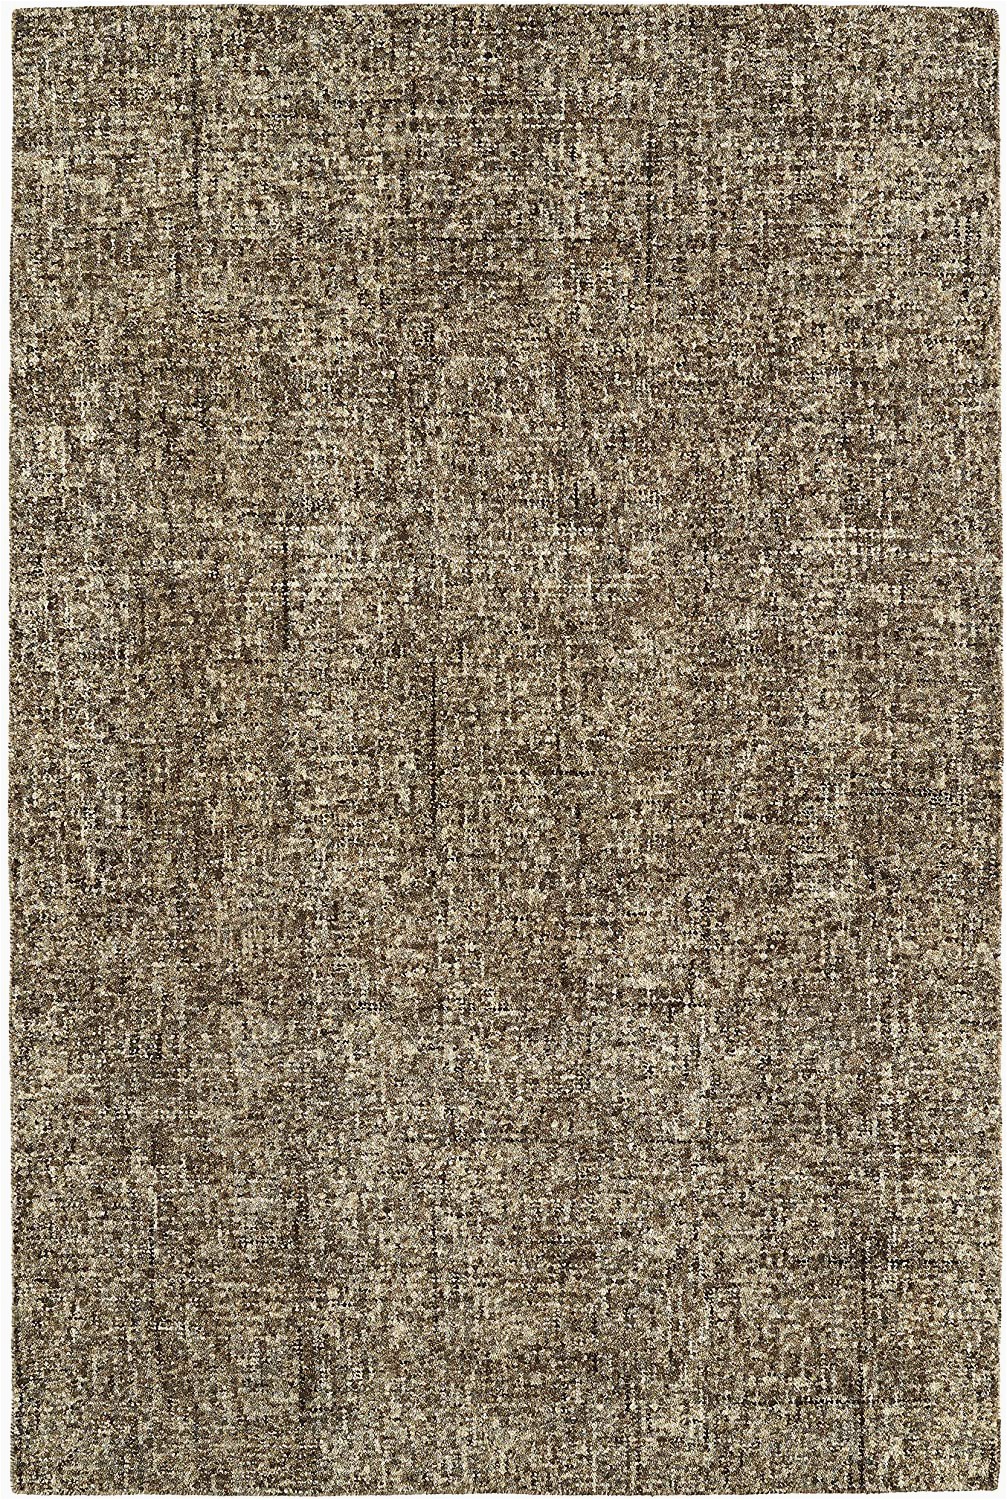 Taupe and Beige area Rugs Amazon Addison Rugs Eastman31 area Rug 5 X7 6" Taupe